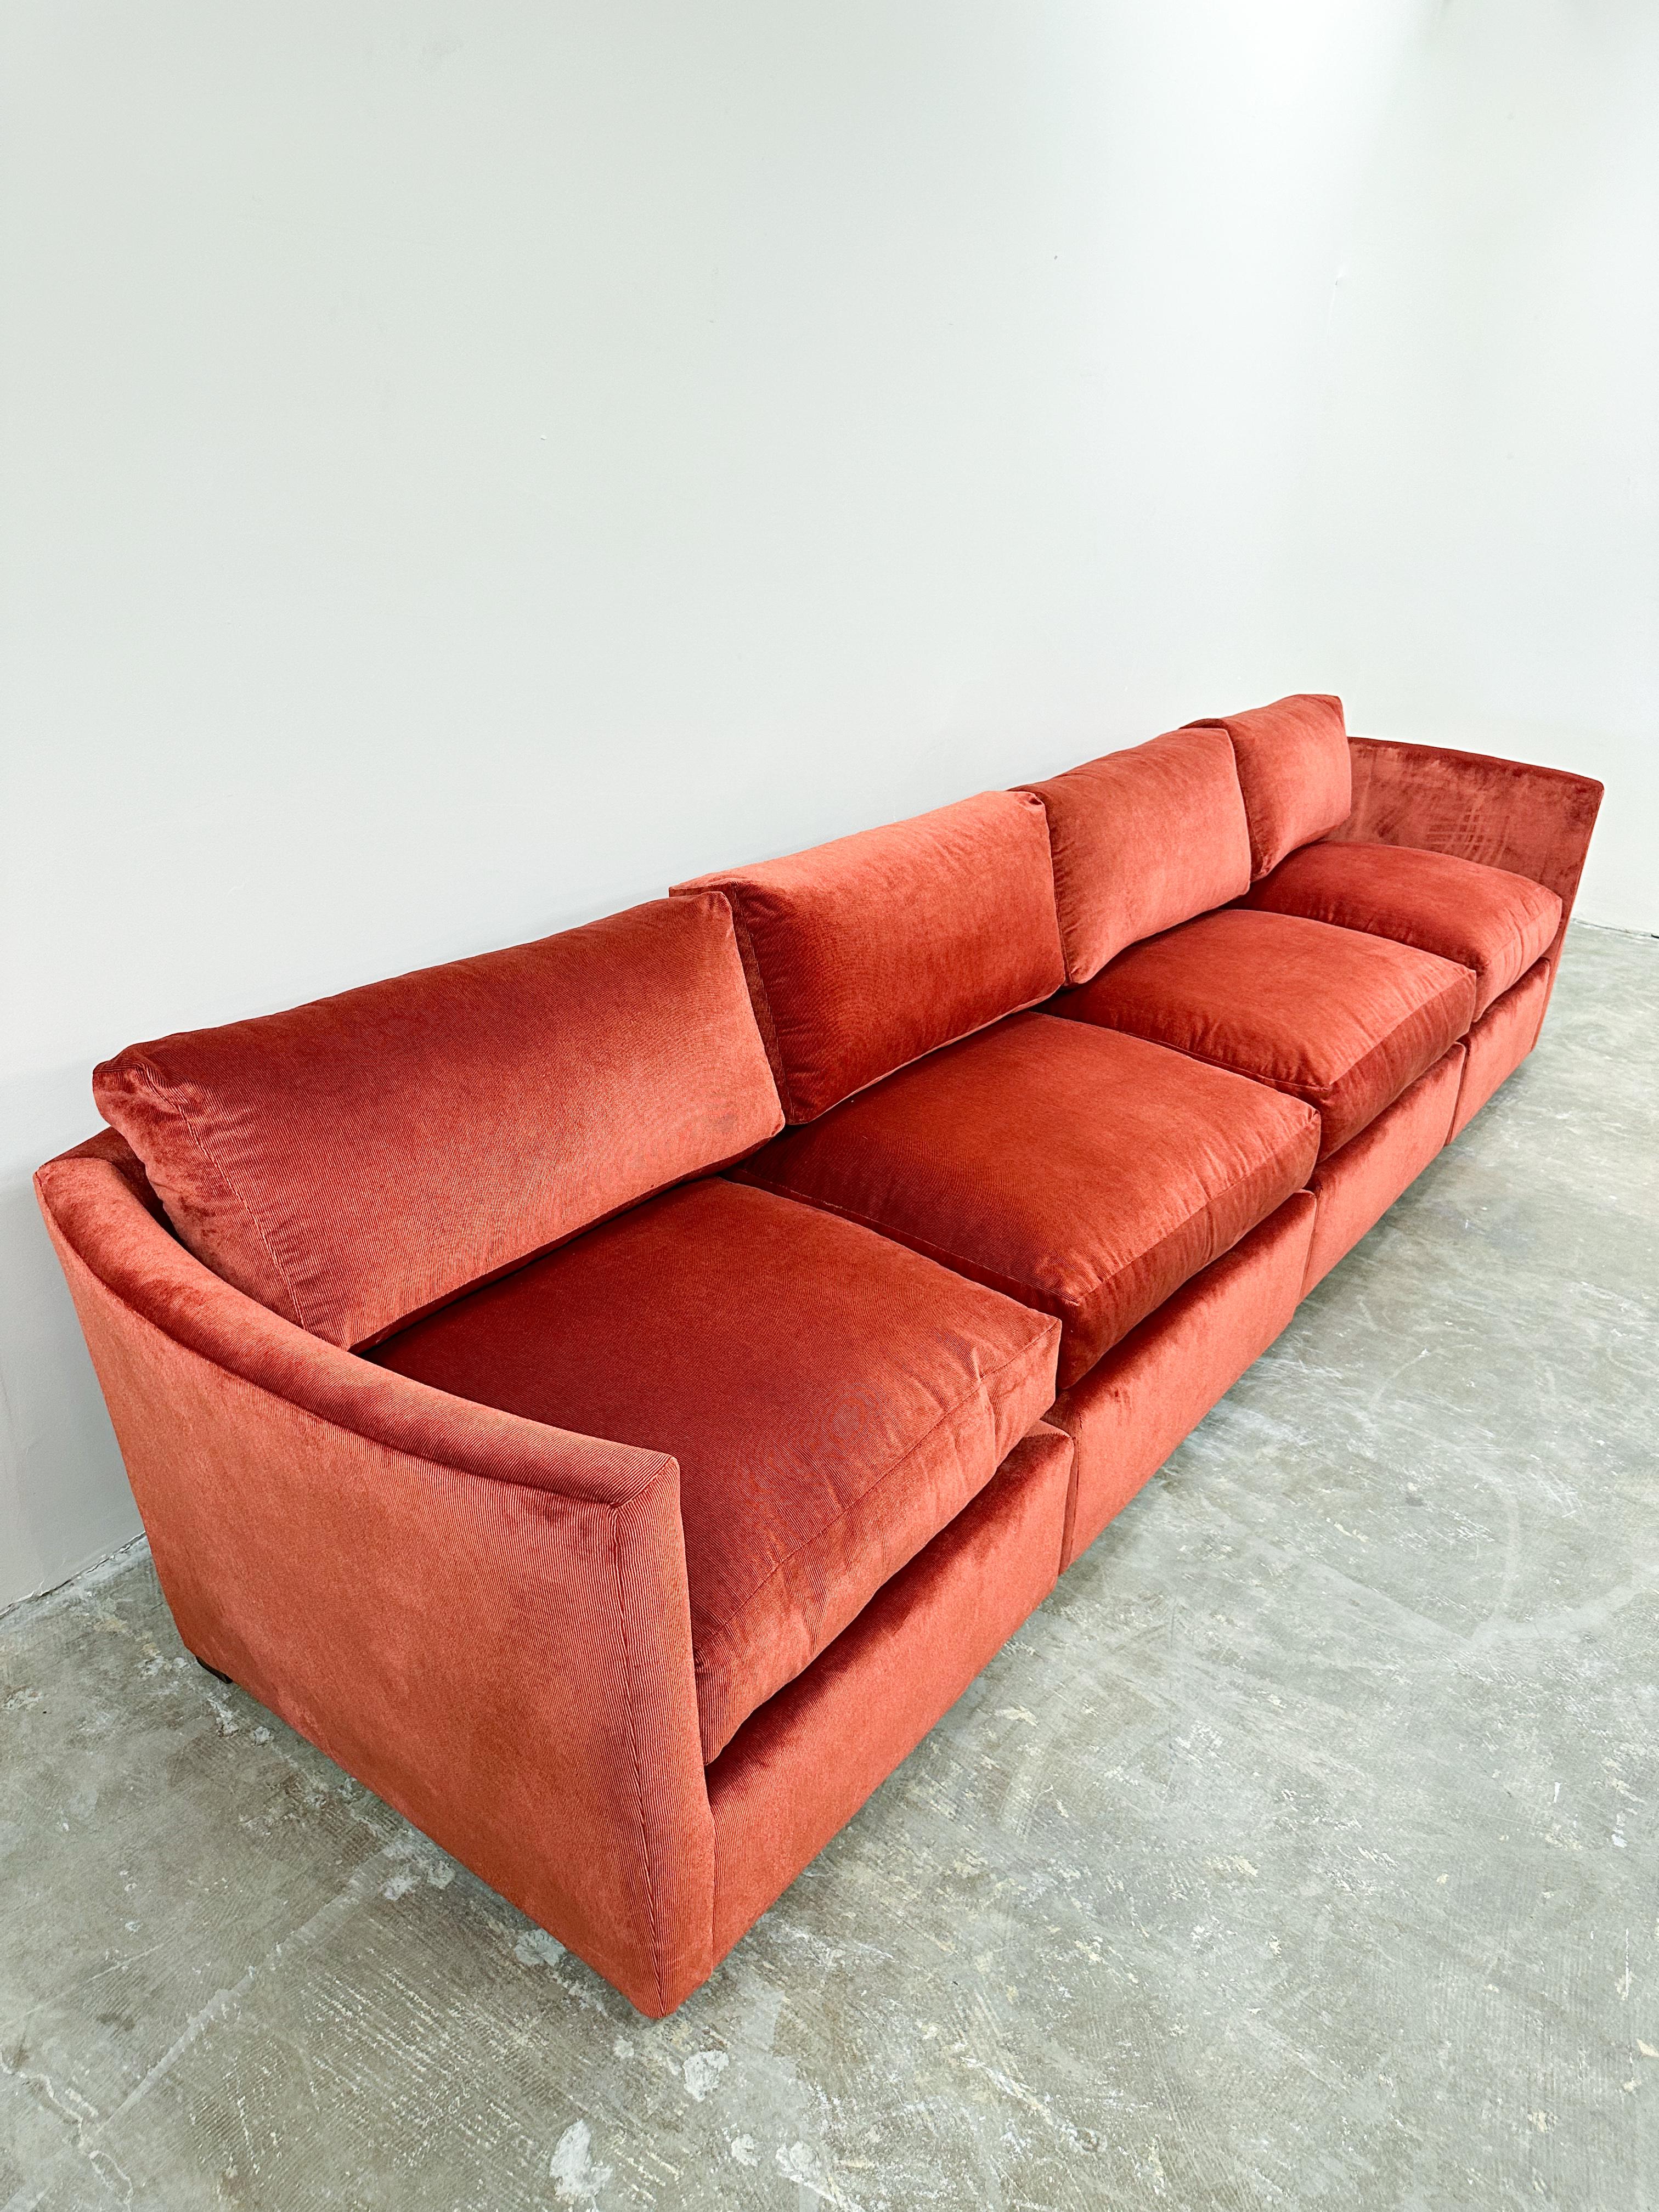 Vintage 70s Burnt Orange Stripe Sectional Sofa Modular Sofa  In Excellent Condition For Sale In Palm Desert, CA